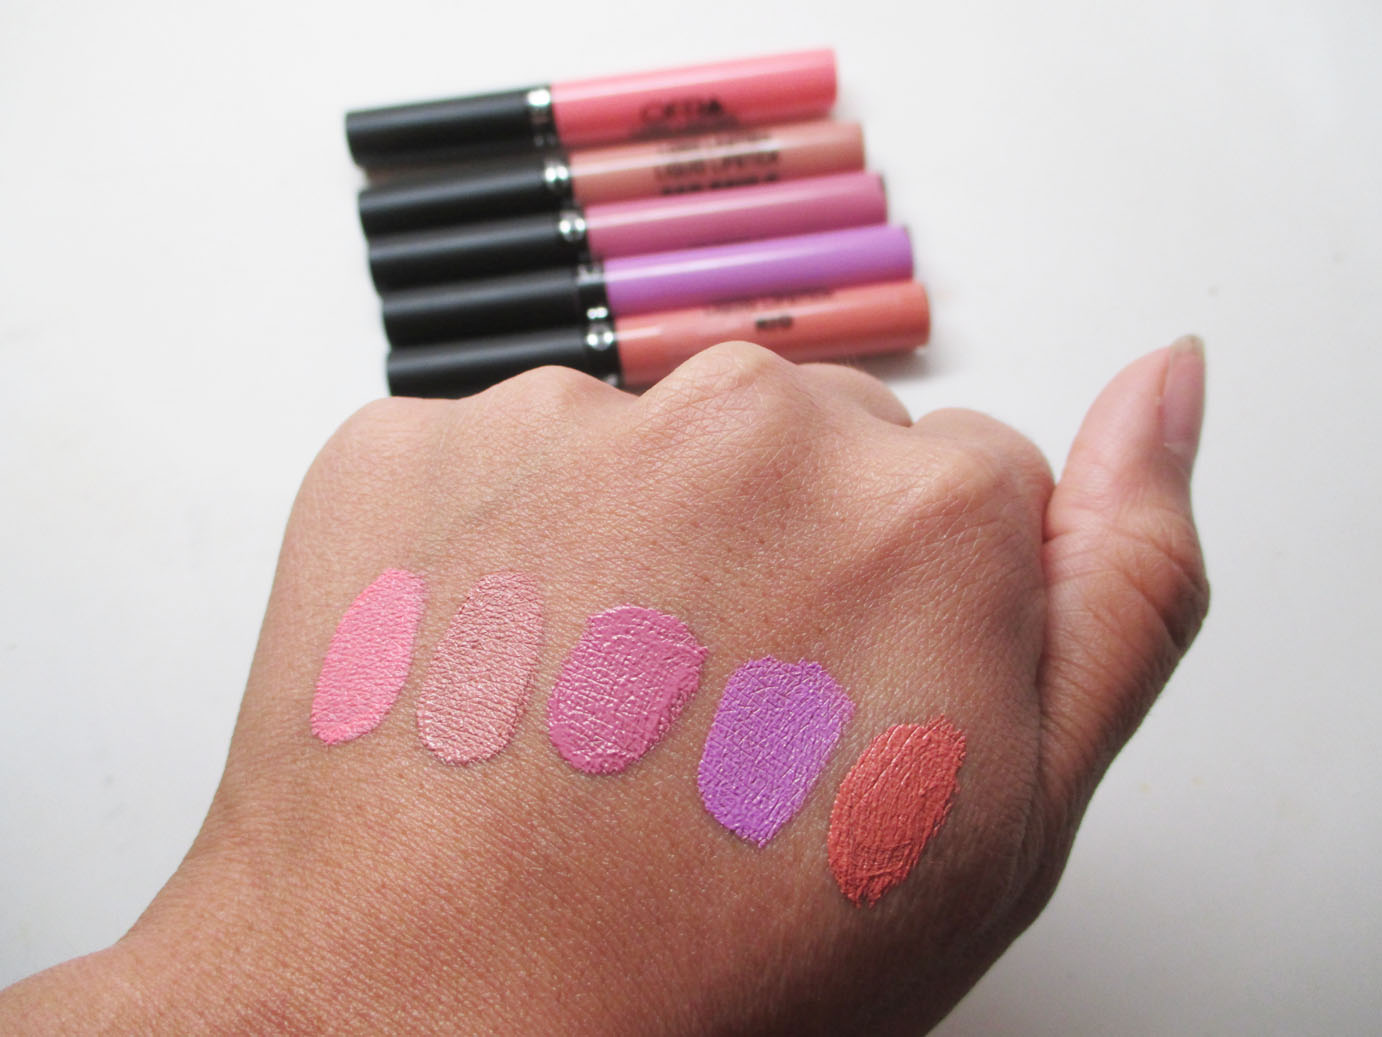 Ofra debuted 5 new spring shades a couple of weeks ago of their popular lon...